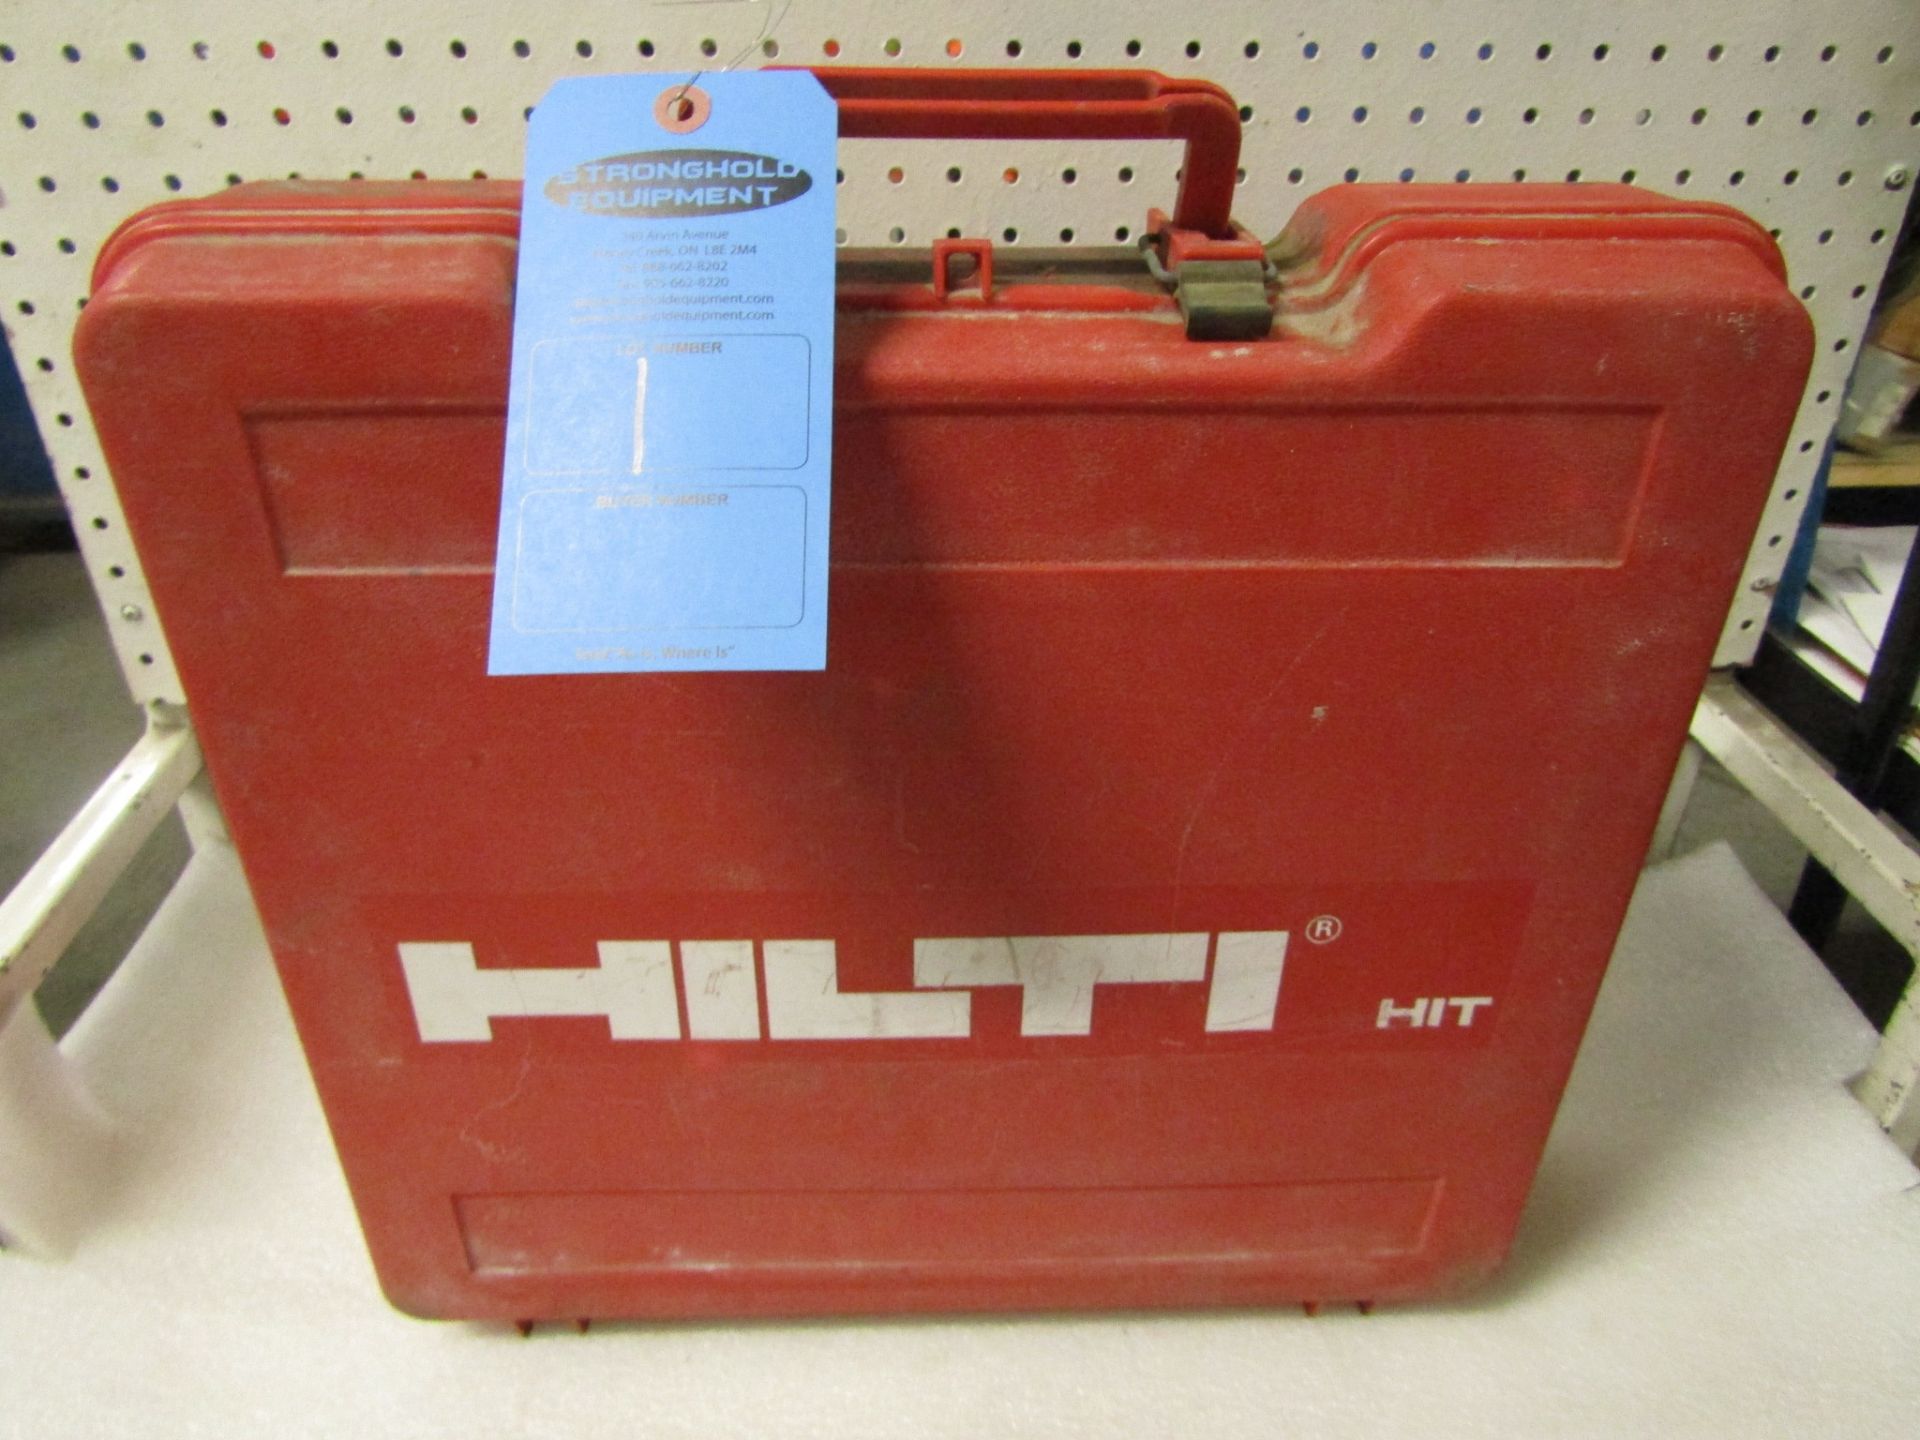 Hilti Injection System in case - Image 3 of 3